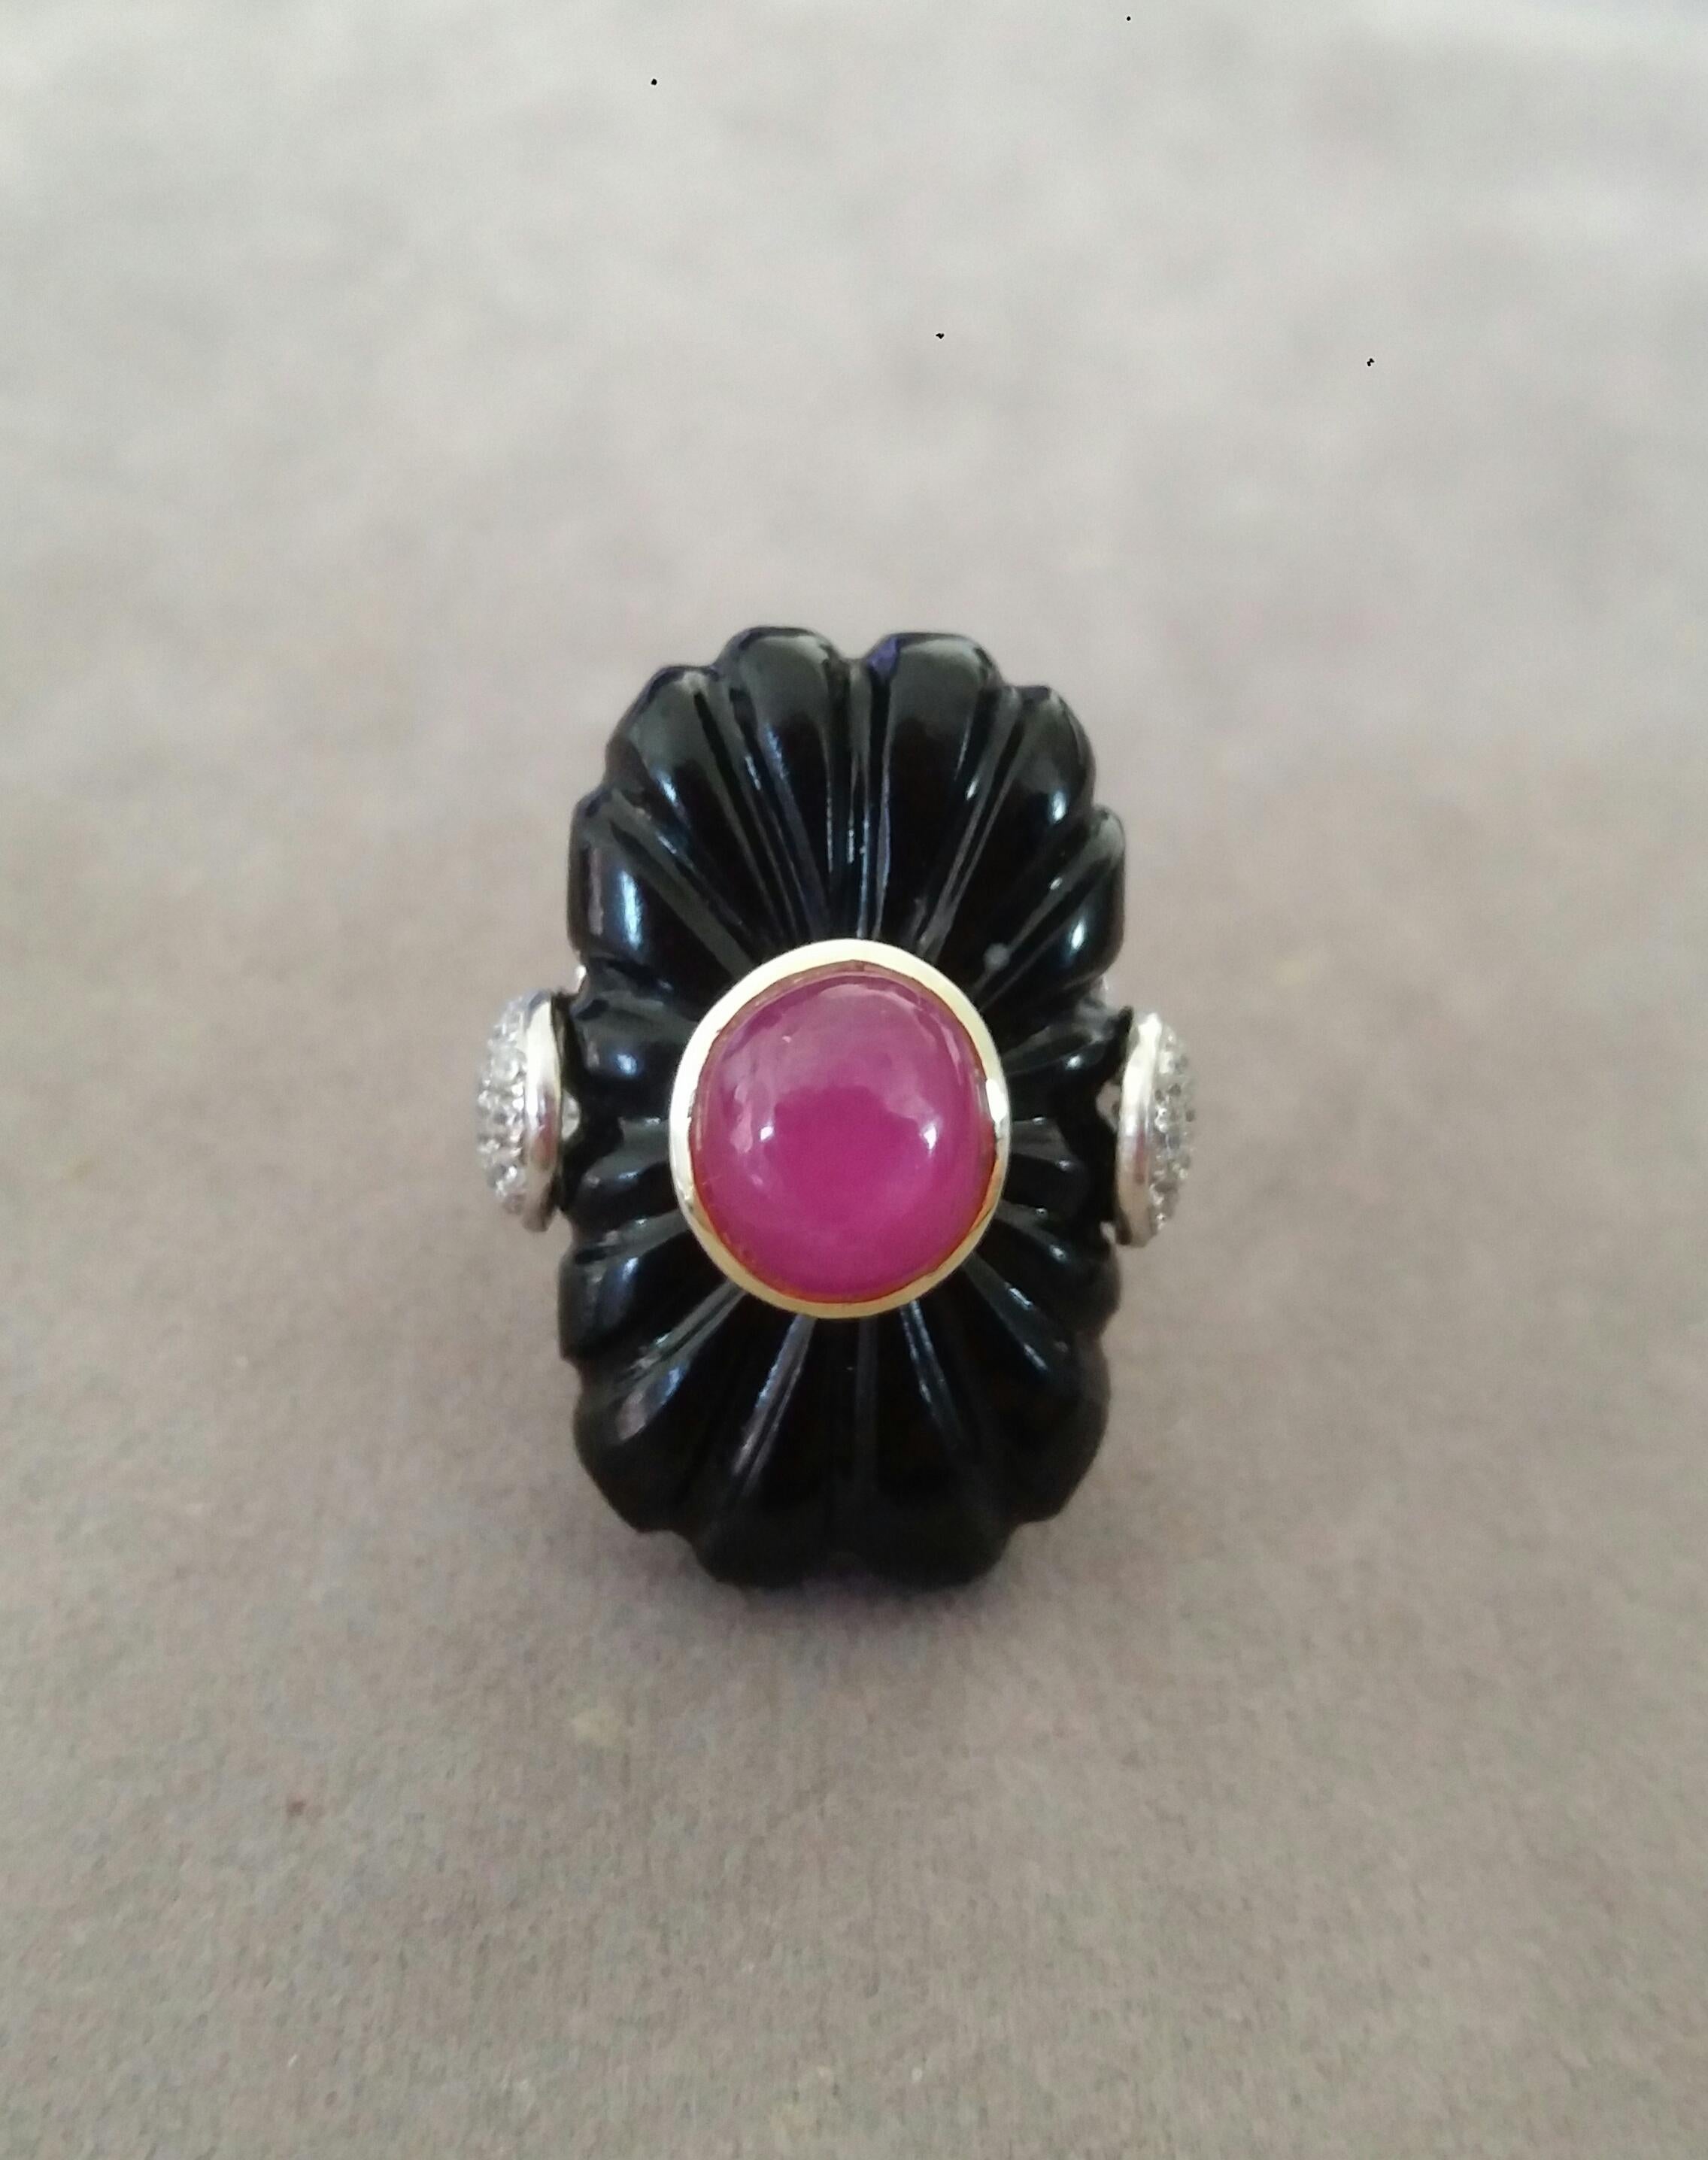 Classic and elegant ring composed of an engraved Black Onyx Classic surmounted by an Oval Ruby Cabochon measuring 8 x 10 mm set in a 14K yellow gold......The shank is in 14k White Gold with 2 pear shape pave' of 34 full cut diamonds on the